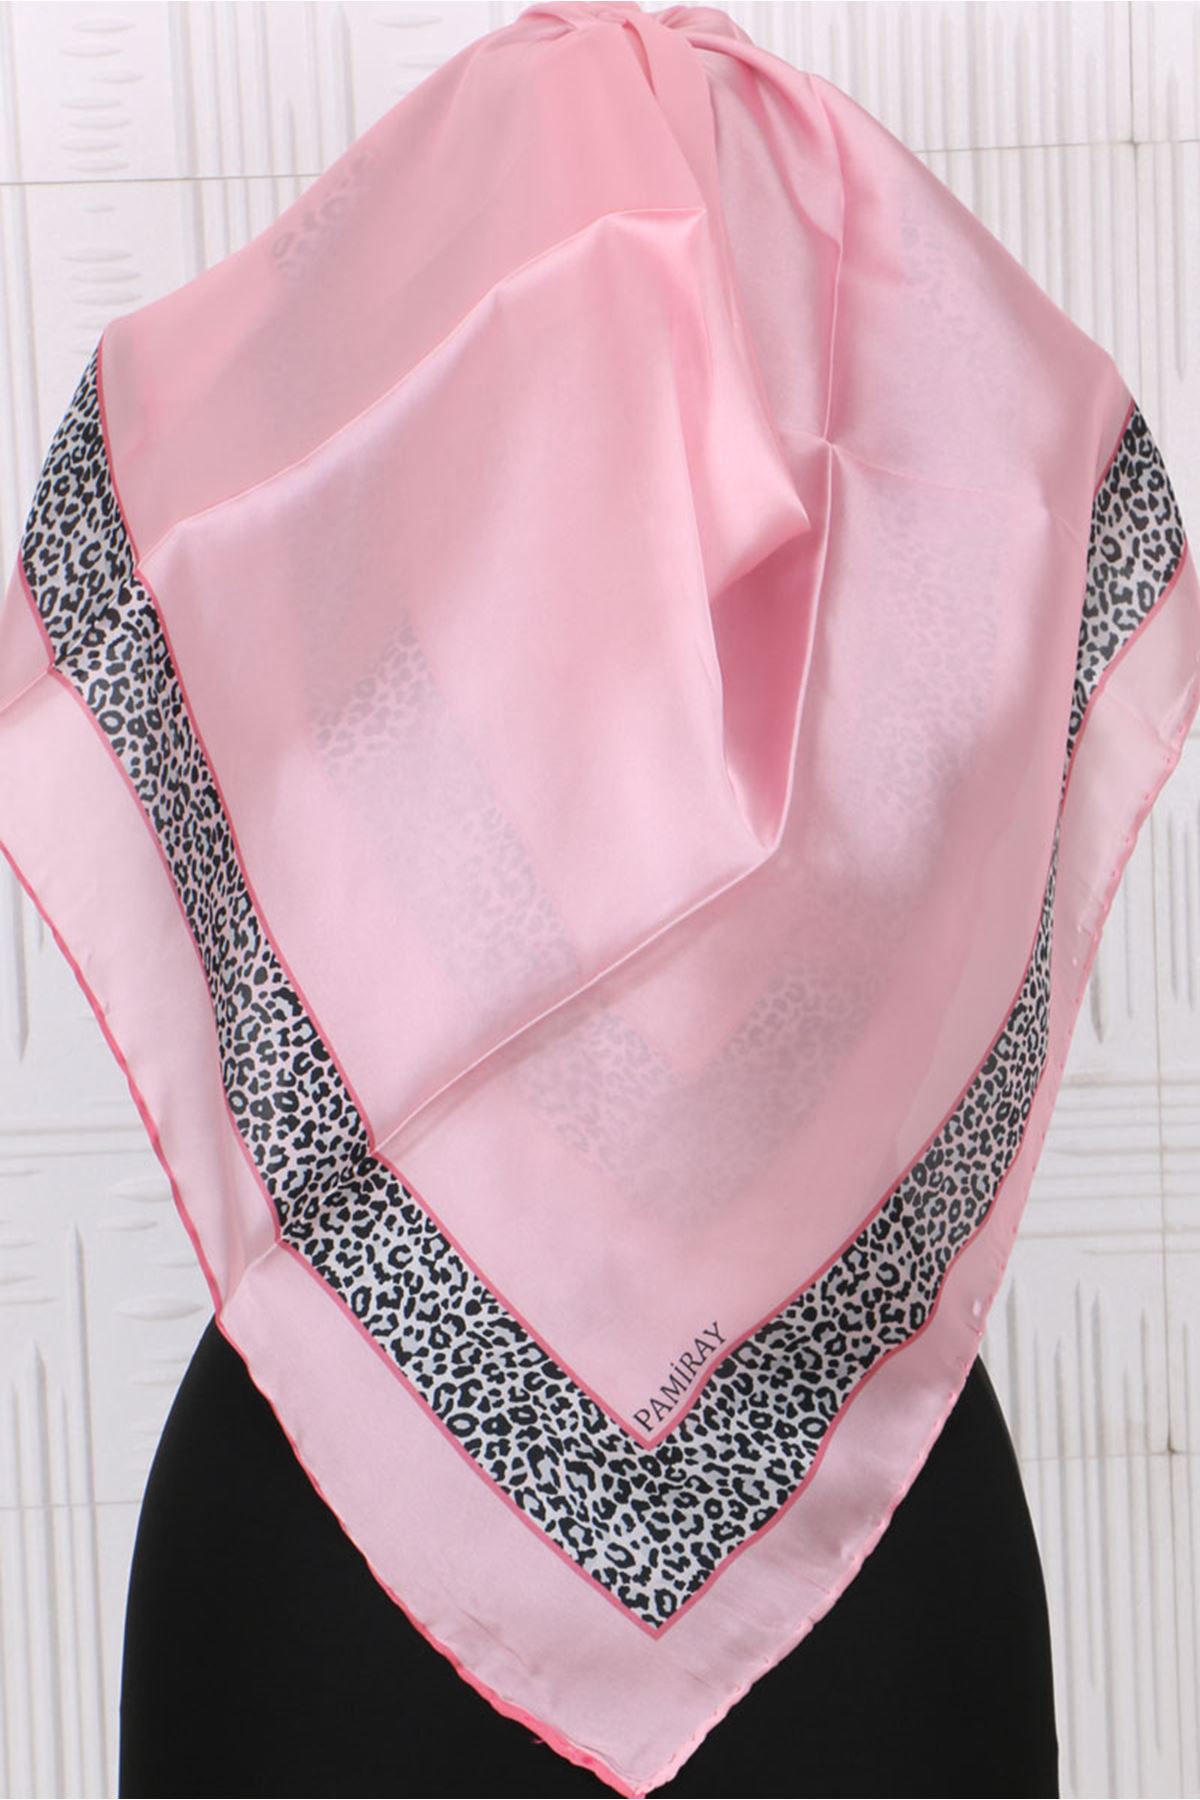 17116 Leopard Patterned Rayon Scarf - Pink